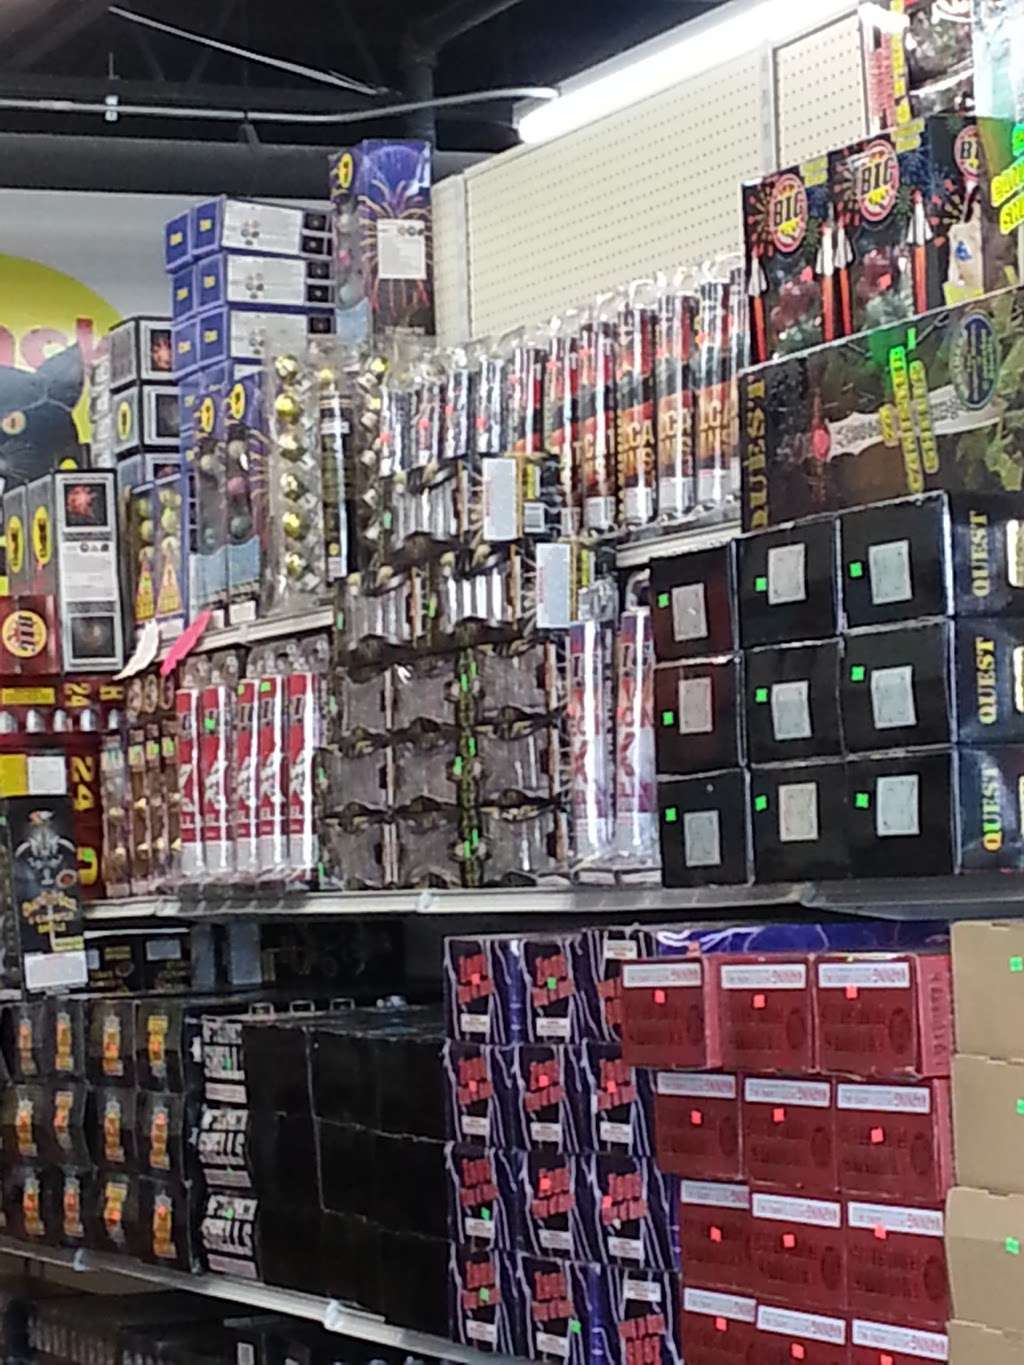 X-Treme Pyro Fireworks | 2607 W Lincoln Hwy, Merrillville, IN 46410 | Phone: (219) 525-5111